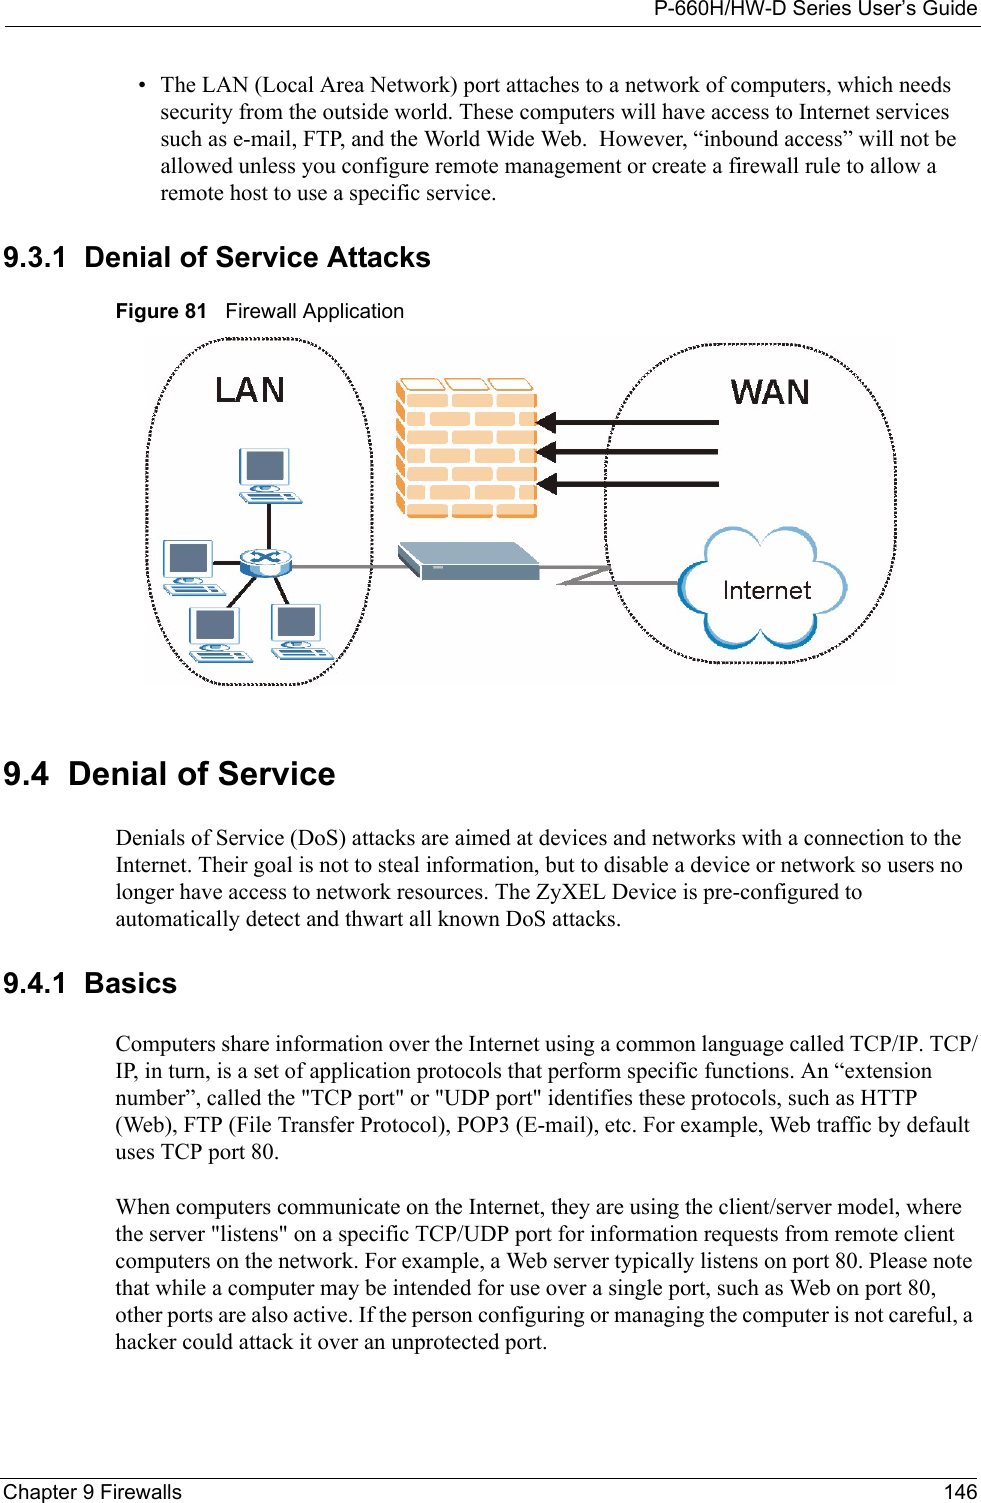 P-660H/HW-D Series User’s GuideChapter 9 Firewalls 146• The LAN (Local Area Network) port attaches to a network of computers, which needs security from the outside world. These computers will have access to Internet services such as e-mail, FTP, and the World Wide Web.  However, “inbound access” will not be allowed unless you configure remote management or create a firewall rule to allow a remote host to use a specific service.9.3.1  Denial of Service AttacksFigure 81   Firewall Application9.4  Denial of ServiceDenials of Service (DoS) attacks are aimed at devices and networks with a connection to the Internet. Their goal is not to steal information, but to disable a device or network so users no longer have access to network resources. The ZyXEL Device is pre-configured to automatically detect and thwart all known DoS attacks.9.4.1  BasicsComputers share information over the Internet using a common language called TCP/IP. TCP/IP, in turn, is a set of application protocols that perform specific functions. An “extension number”, called the &quot;TCP port&quot; or &quot;UDP port&quot; identifies these protocols, such as HTTP (Web), FTP (File Transfer Protocol), POP3 (E-mail), etc. For example, Web traffic by default uses TCP port 80. When computers communicate on the Internet, they are using the client/server model, where the server &quot;listens&quot; on a specific TCP/UDP port for information requests from remote client computers on the network. For example, a Web server typically listens on port 80. Please note that while a computer may be intended for use over a single port, such as Web on port 80, other ports are also active. If the person configuring or managing the computer is not careful, a hacker could attack it over an unprotected port. 